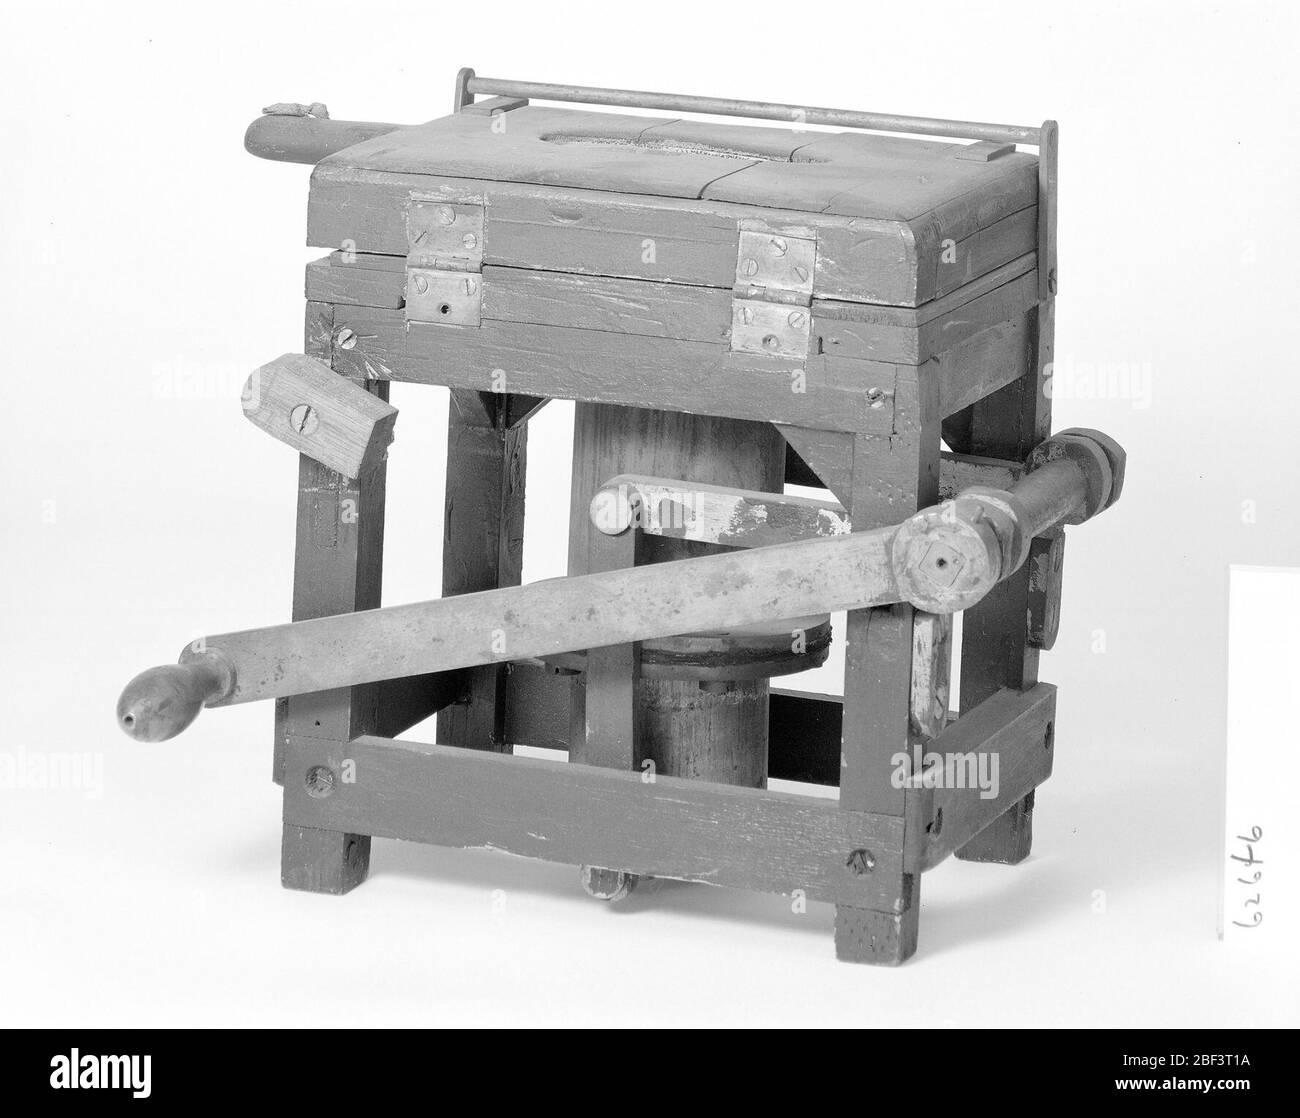 Patent Model of a Printing Press for Uneven Surfaces. This patent model demonstrates an invention for a printing press for uneven surfaces which was granted patent number 62646. The patent describes relief printing from a vulcanized rubber plate with fluid pressure, such as air pressure. Stock Photo